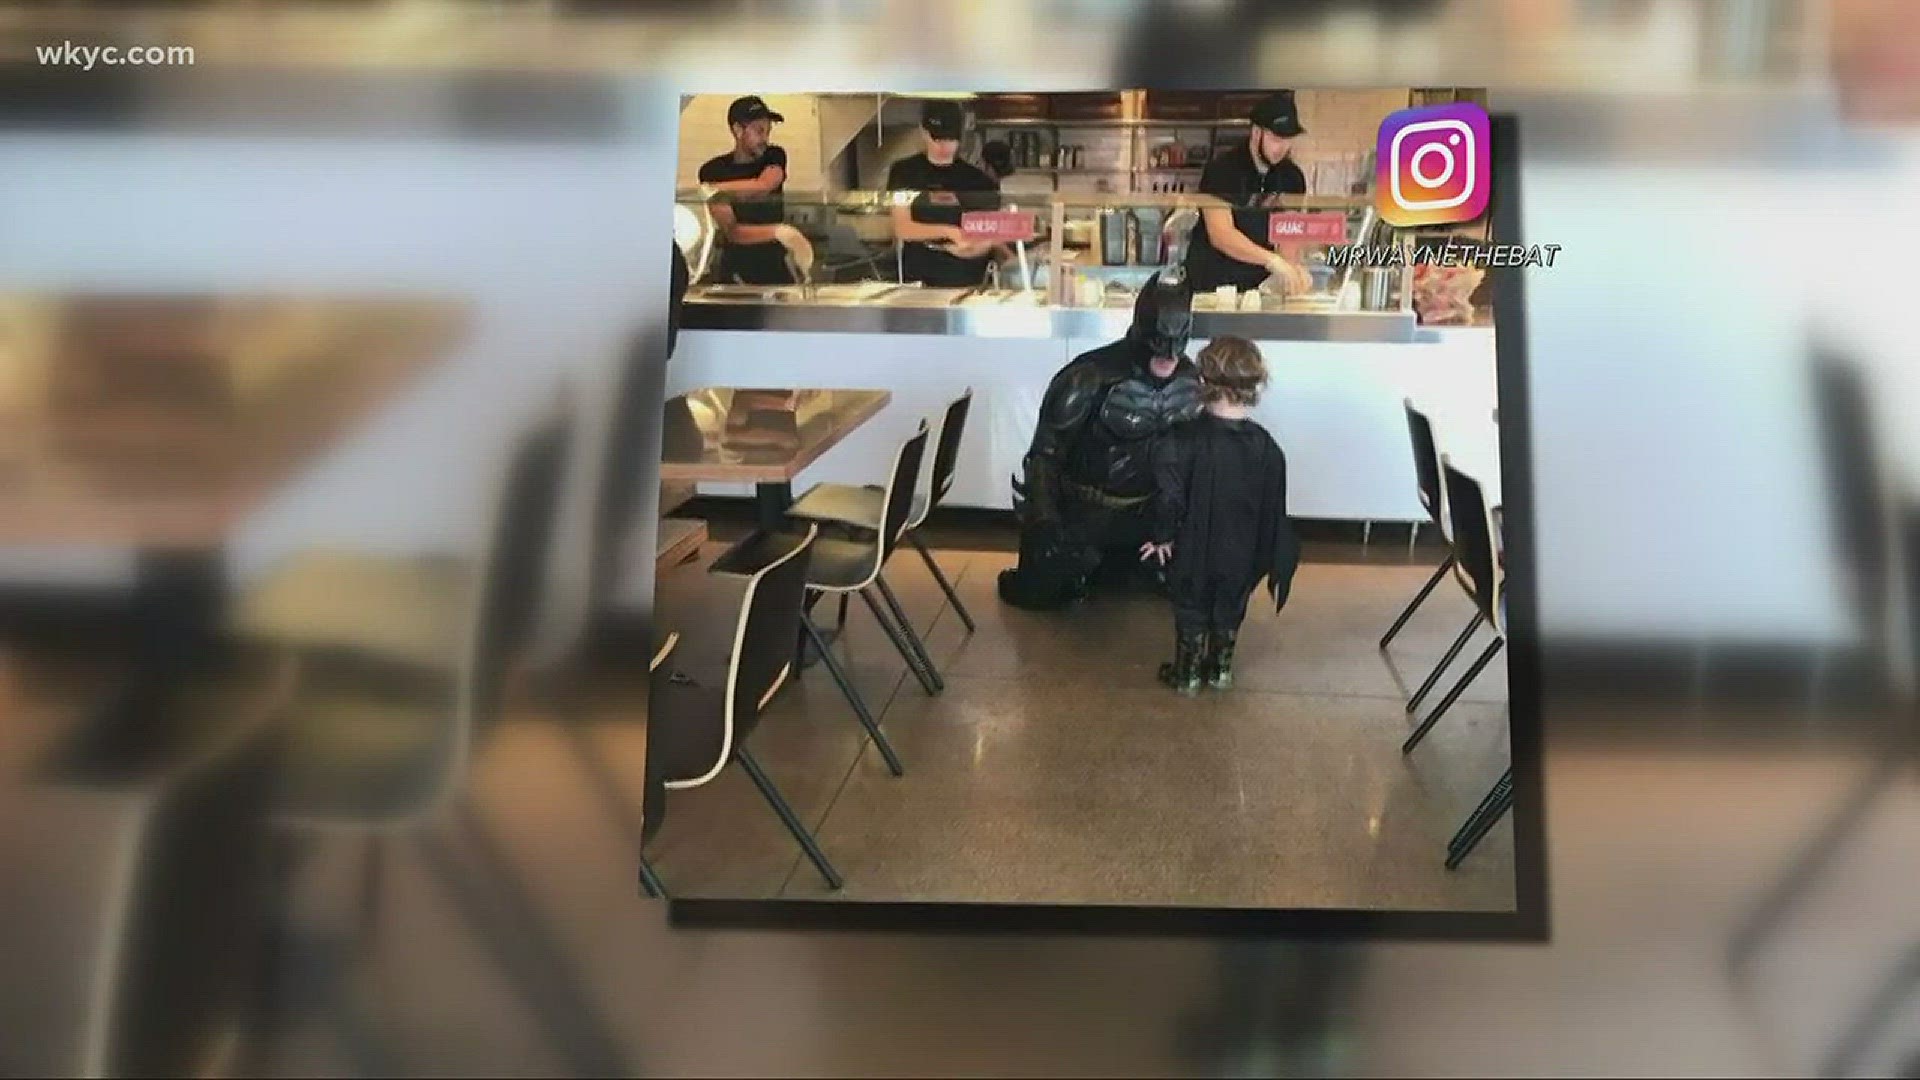 Ohio man ends eating at Chipotle streak after 500 days